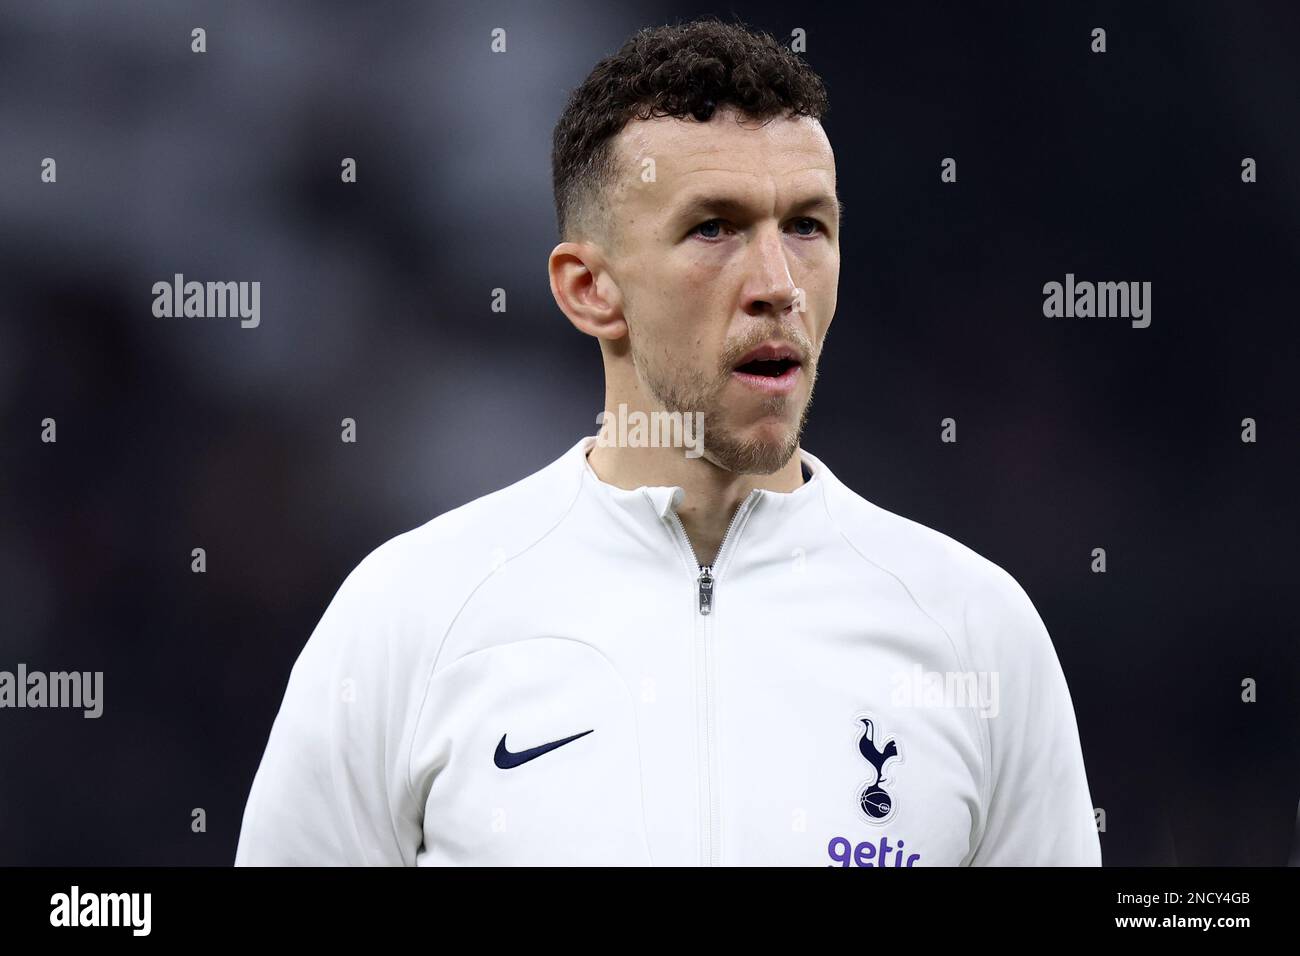 Ivan Perisic of Tottenham Hotspur Fc looks on during the Uefa Champions League round of 16 first leg match between AC Milan and Tottenham Hotspur at Giuseppe Meazza Stadium on February 14, 2023 in Milan, Italy. Stock Photo